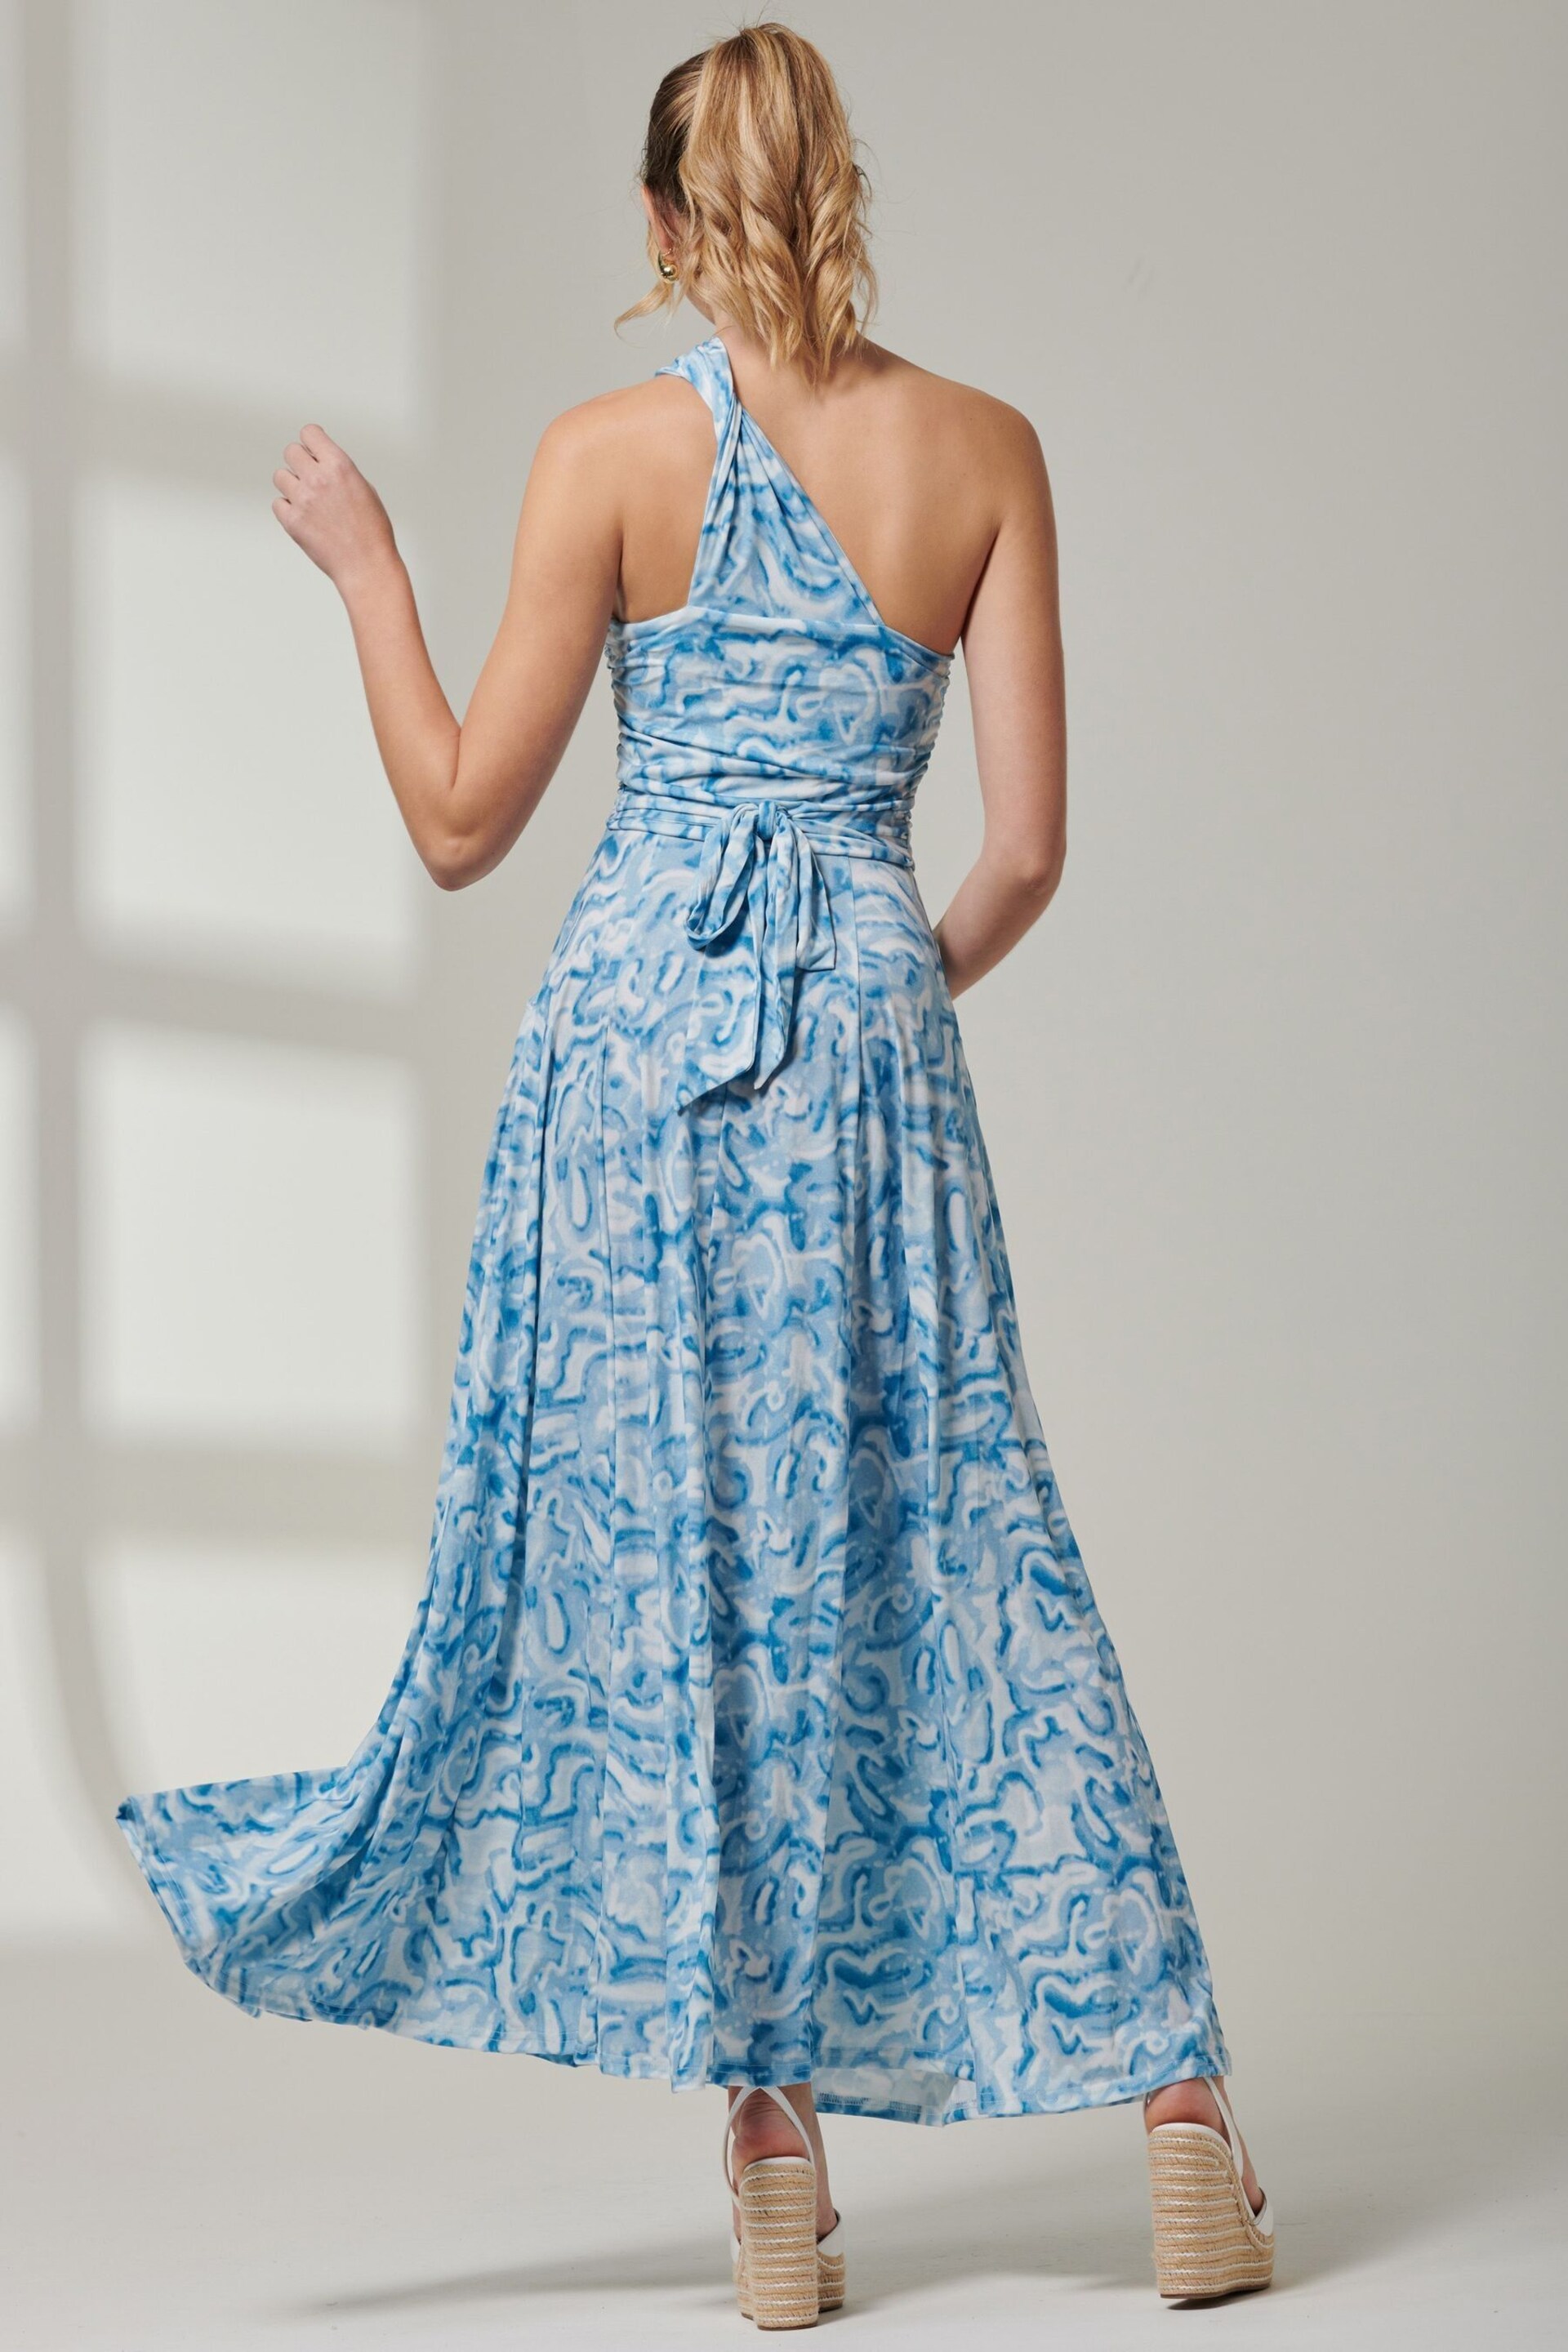 Jolie Moi Blue Abstract Ruched Waist Jersey Maxi Dress - Image 2 of 6